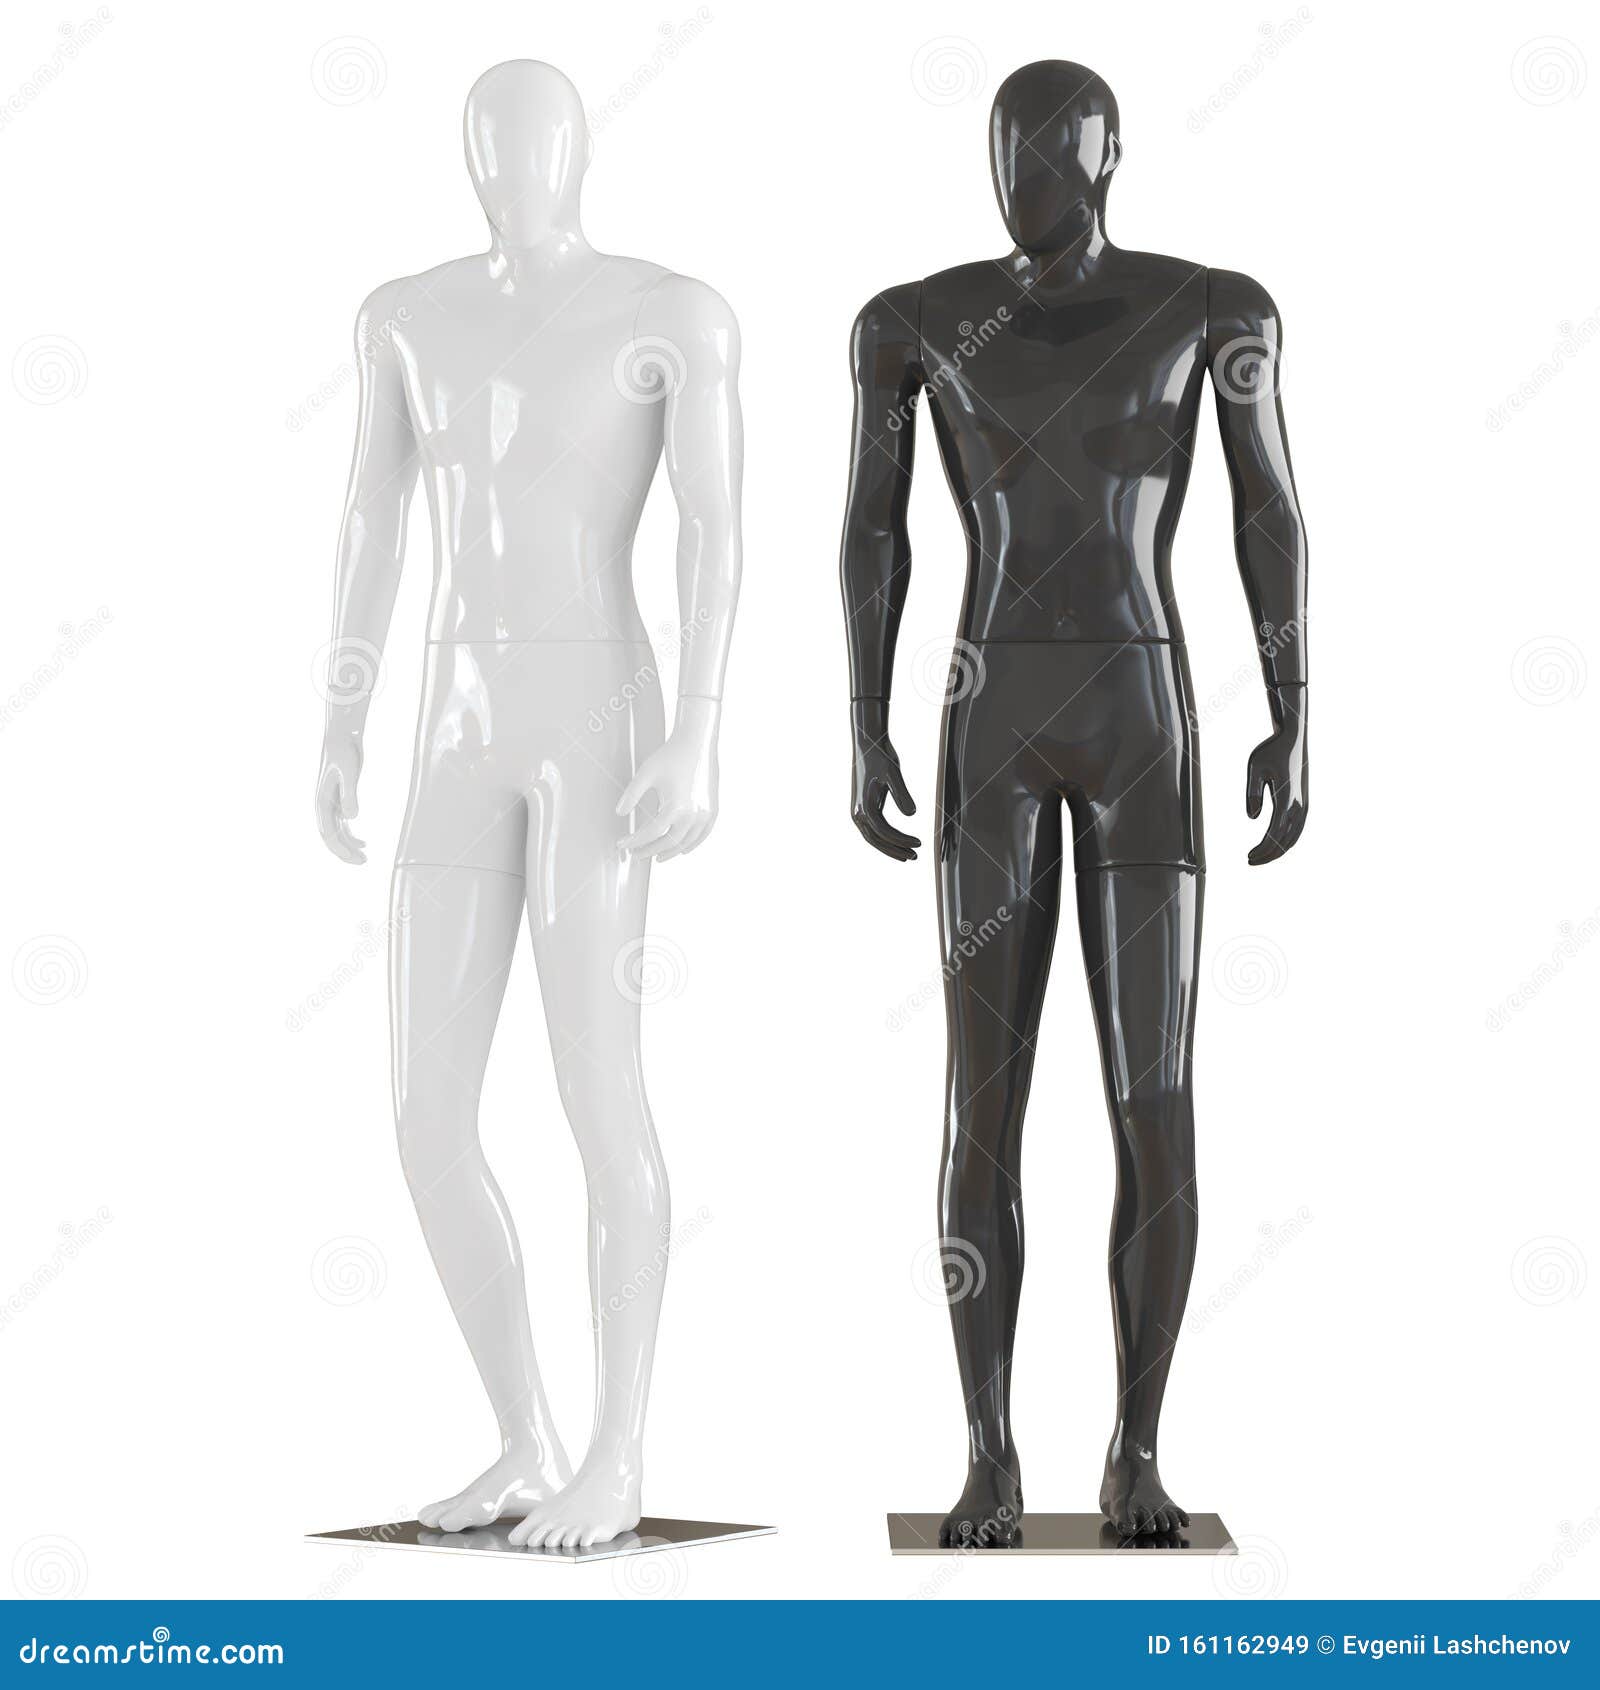 Black and White Mannequin Stand in a Free Straight Pose. 3D Rendering on  Isolated Background Stock Illustration - Illustration of head, reflection:  161162949